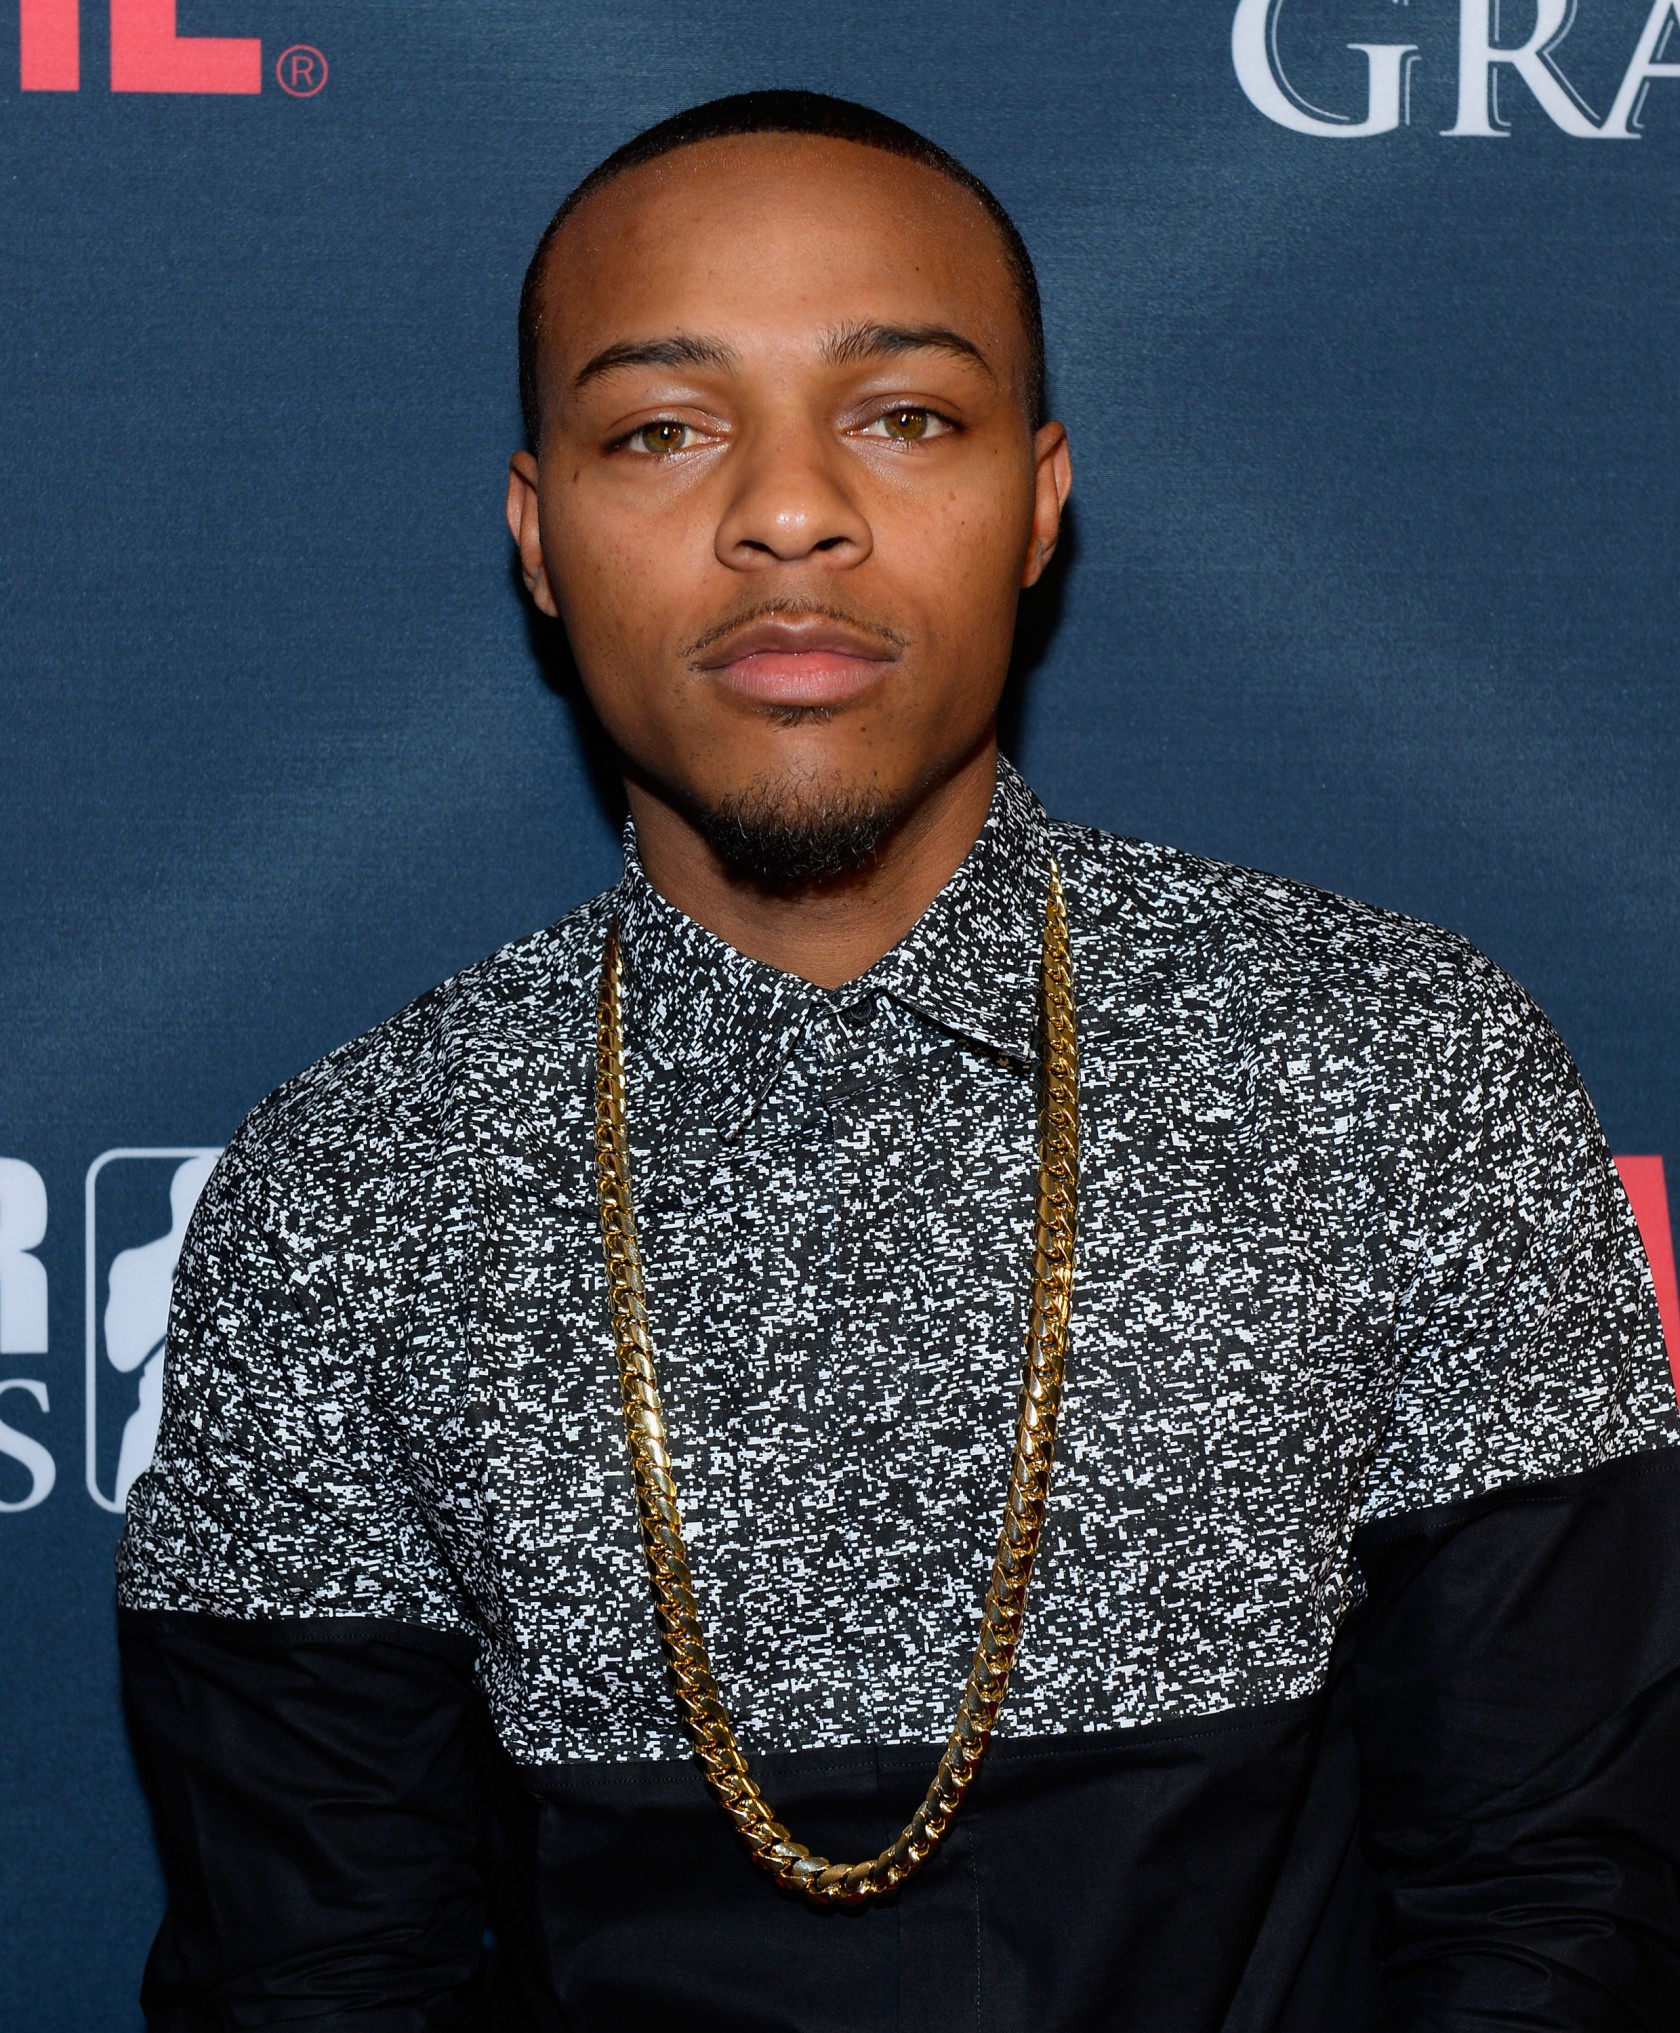 Bow Wow's Father Puts Him On Blast In Open Letter